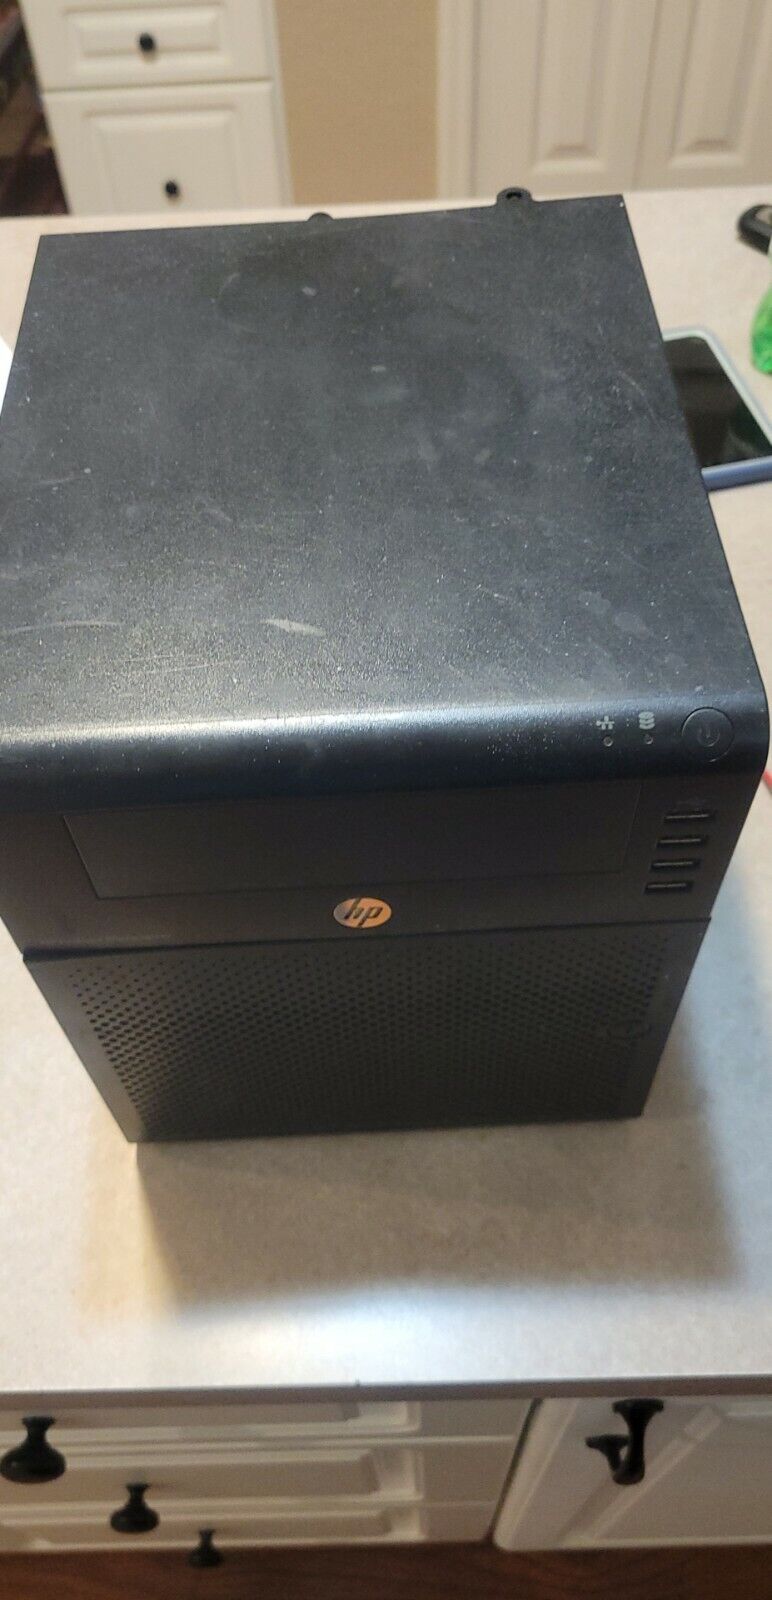 HP ProLiant G7 N54L 1P MicroServer Untested, No Drives, 3 Drive Holders, No Key